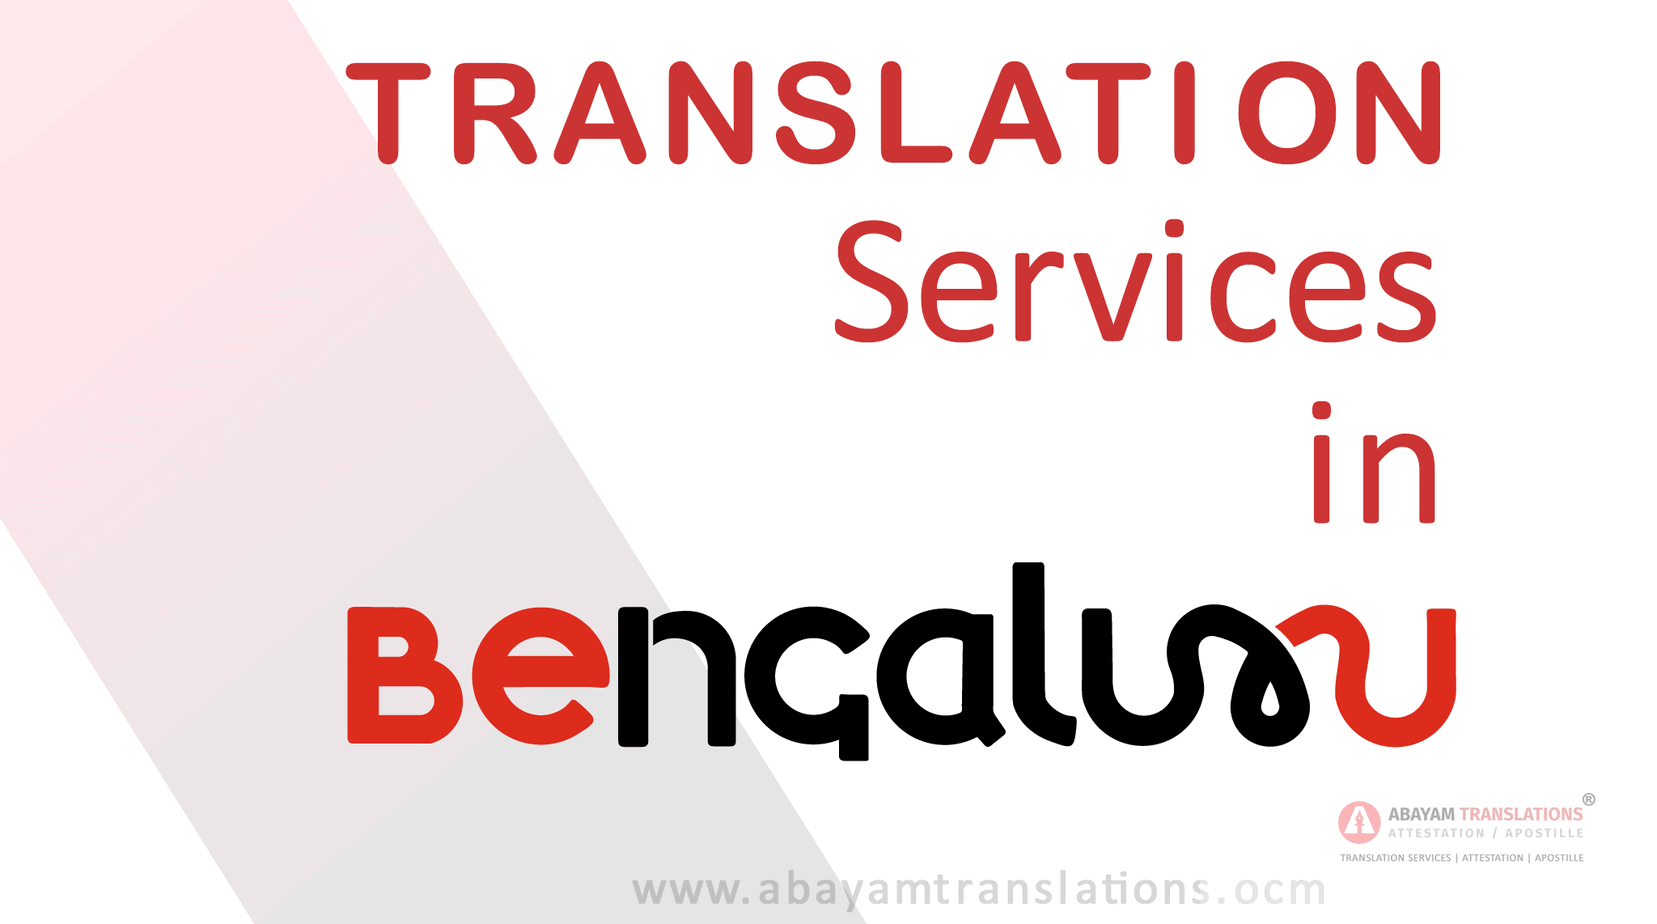 Translation Services in Bangalroe